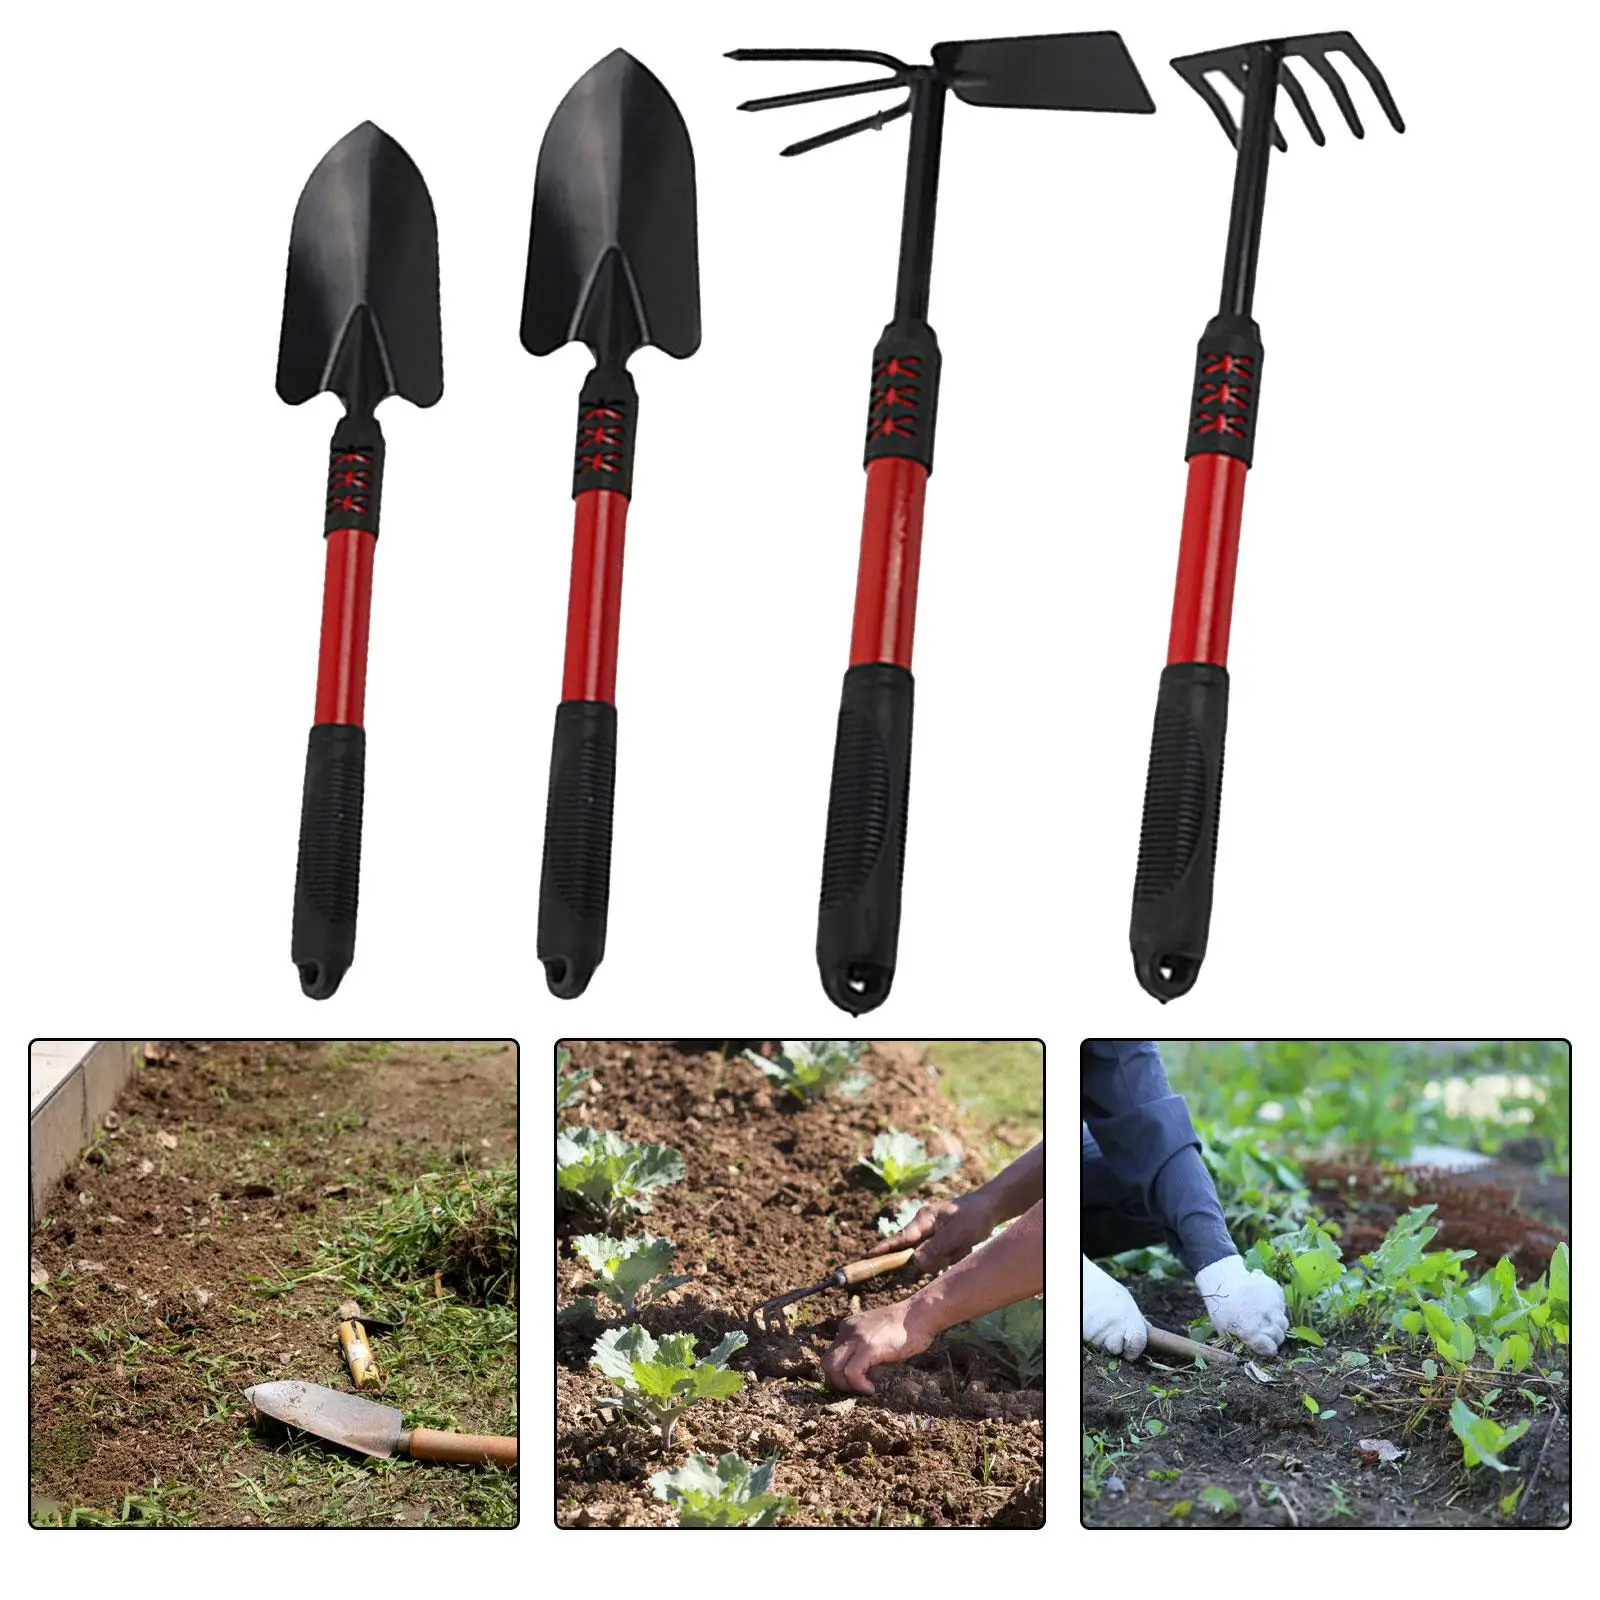 4 Pieces Gardening Tool Kits Durable Heavy Duty Garden Hoe Cultivator Garden Tool Set for Digging Potted Flowers Loose Ground